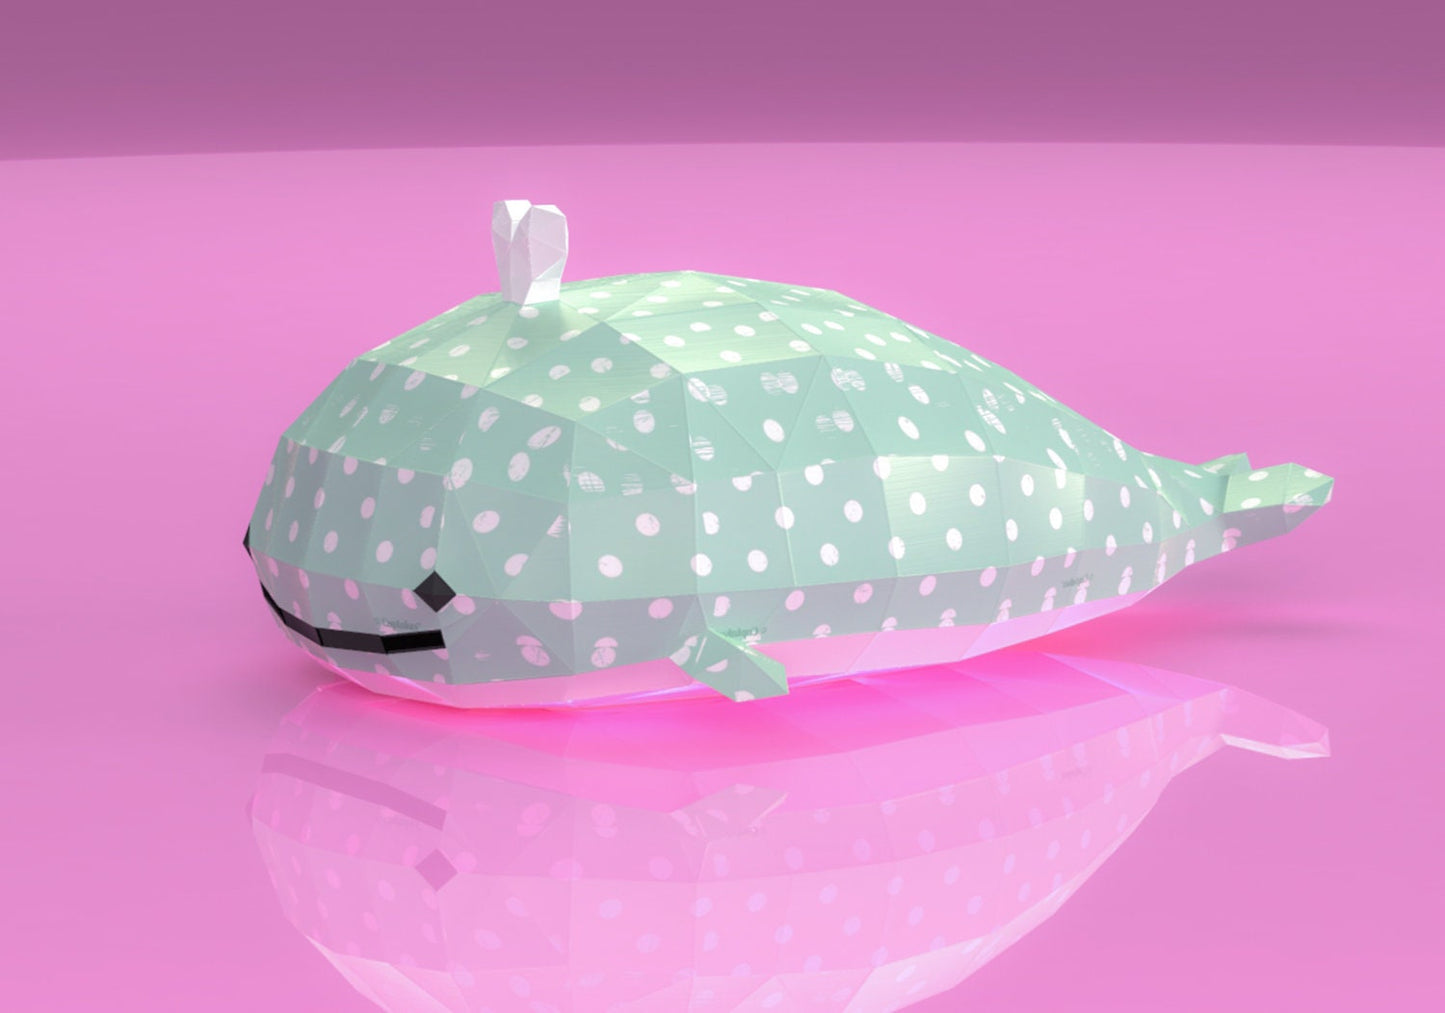 Papercraft Whale